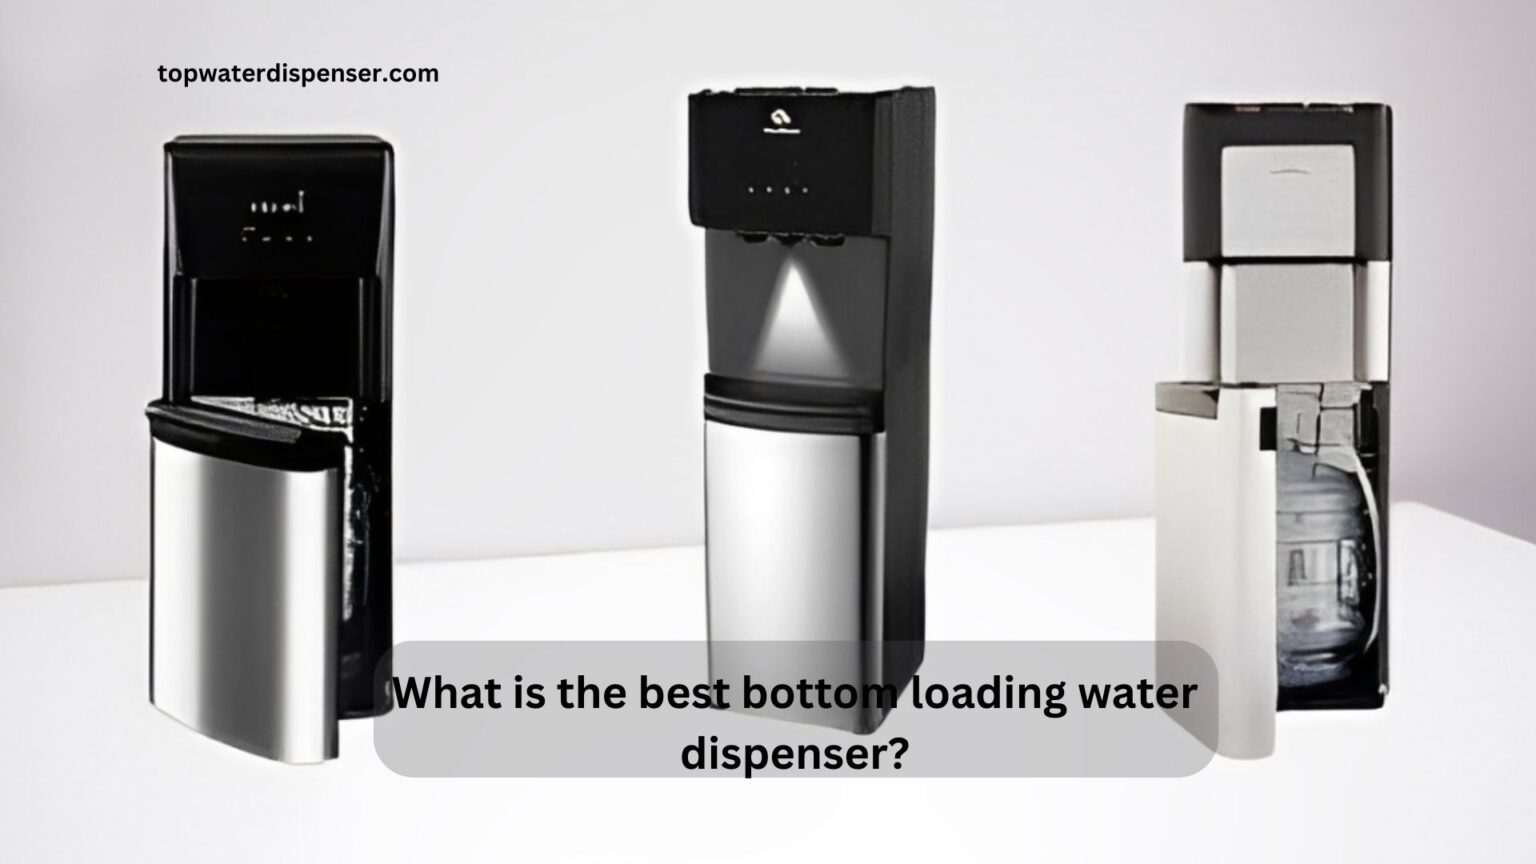 What is the best bottom loading water dispenser?